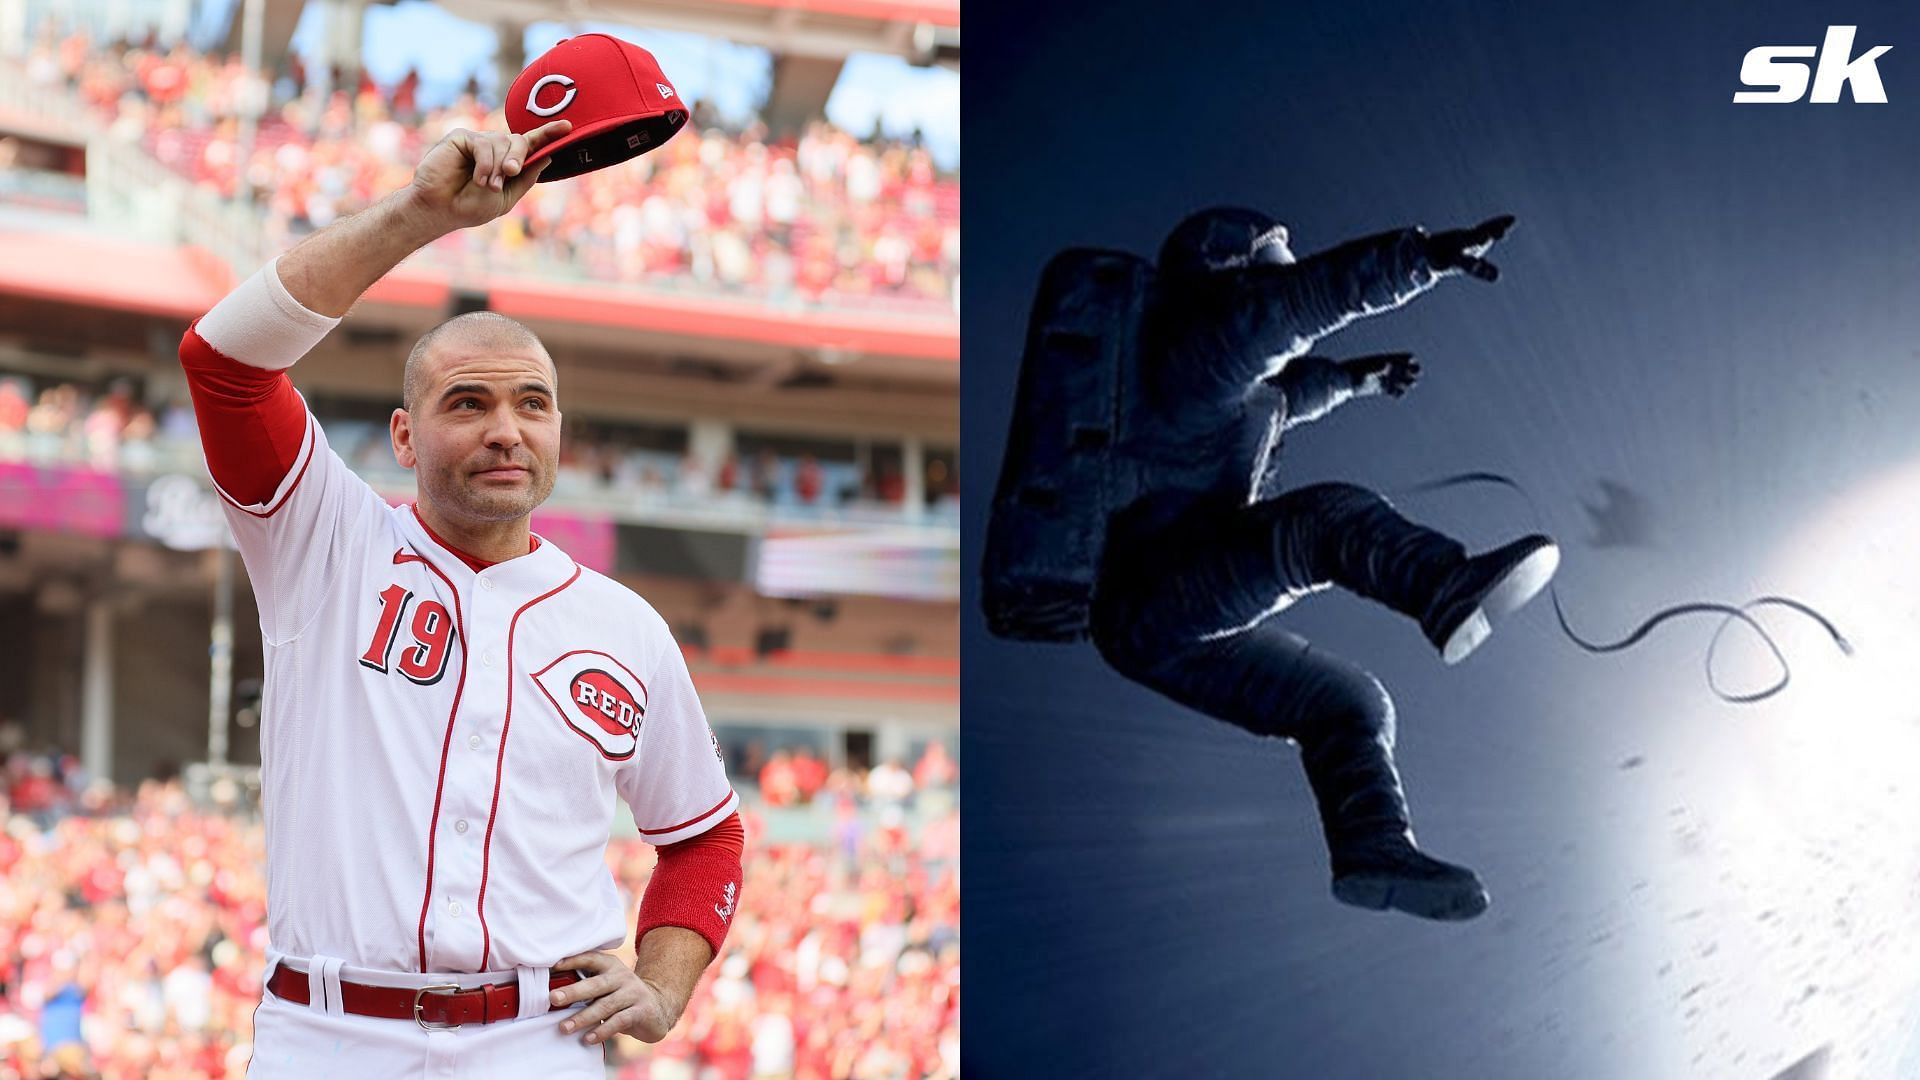 Joey Votto sharesa cryptic message as uncertainty looms over free agency. 